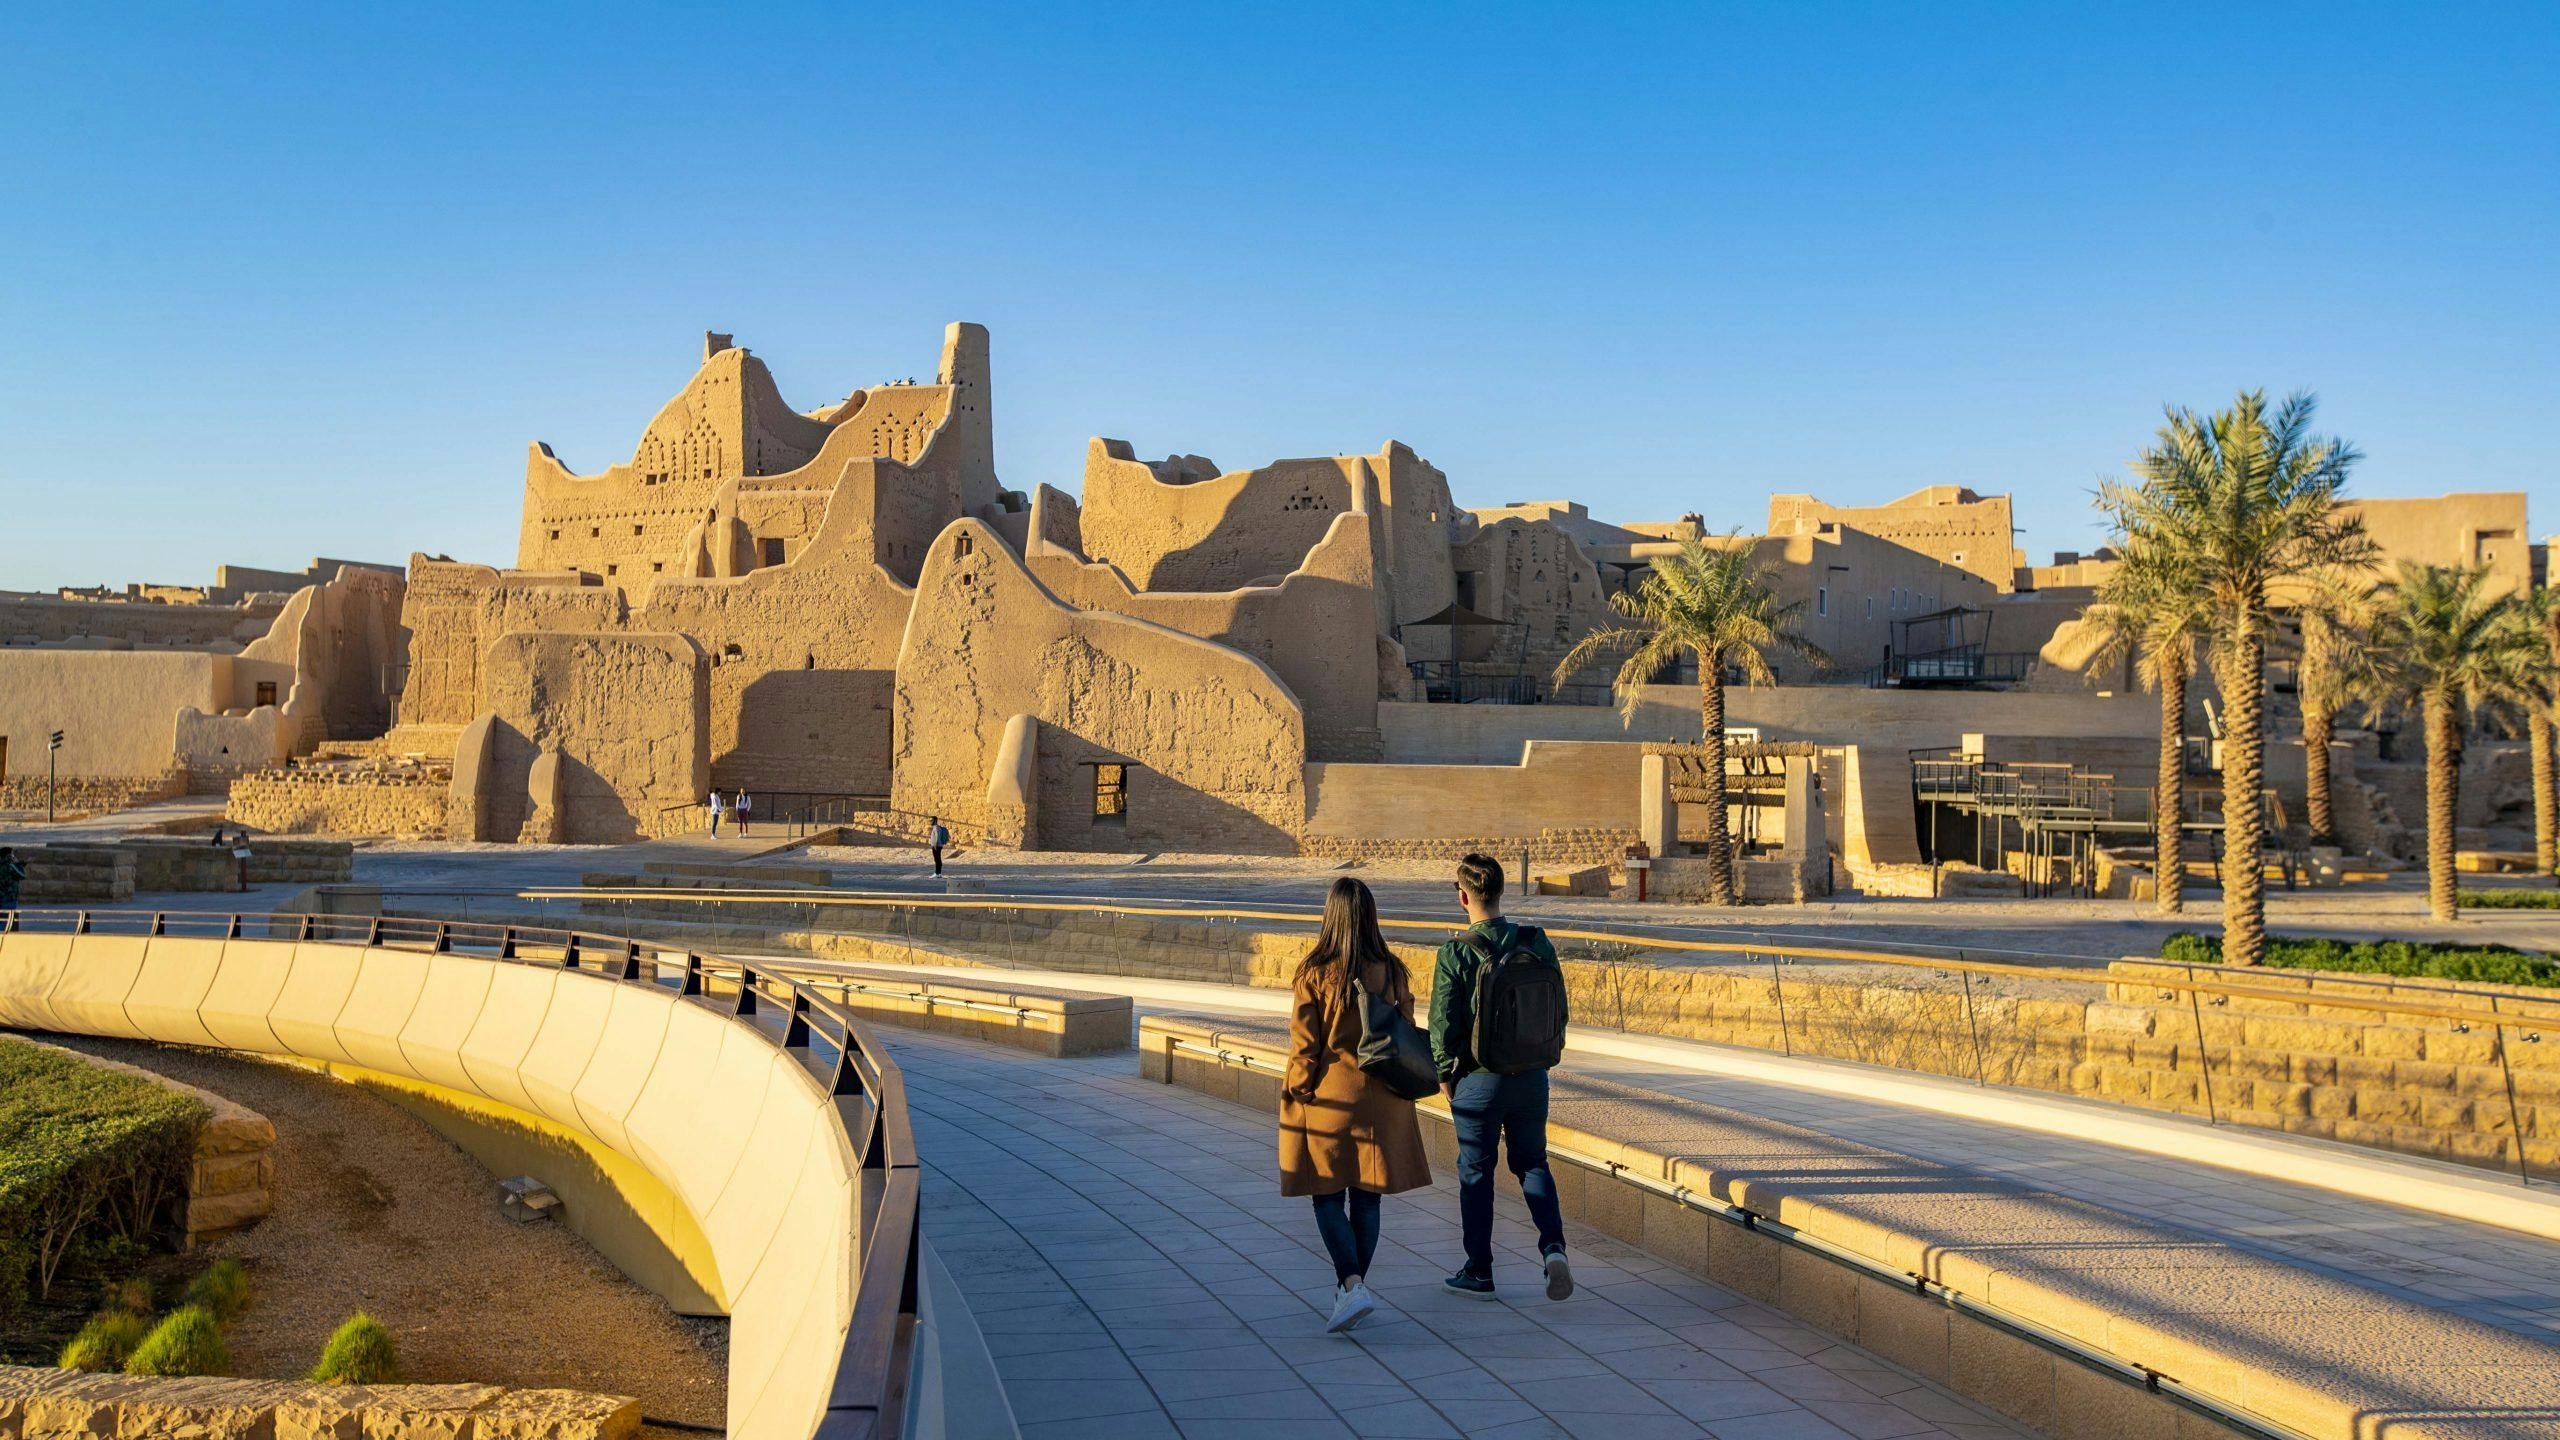 From e-visas to e-payments, Saudi Arabia prepares for 3 million Chinese visitors by 2030